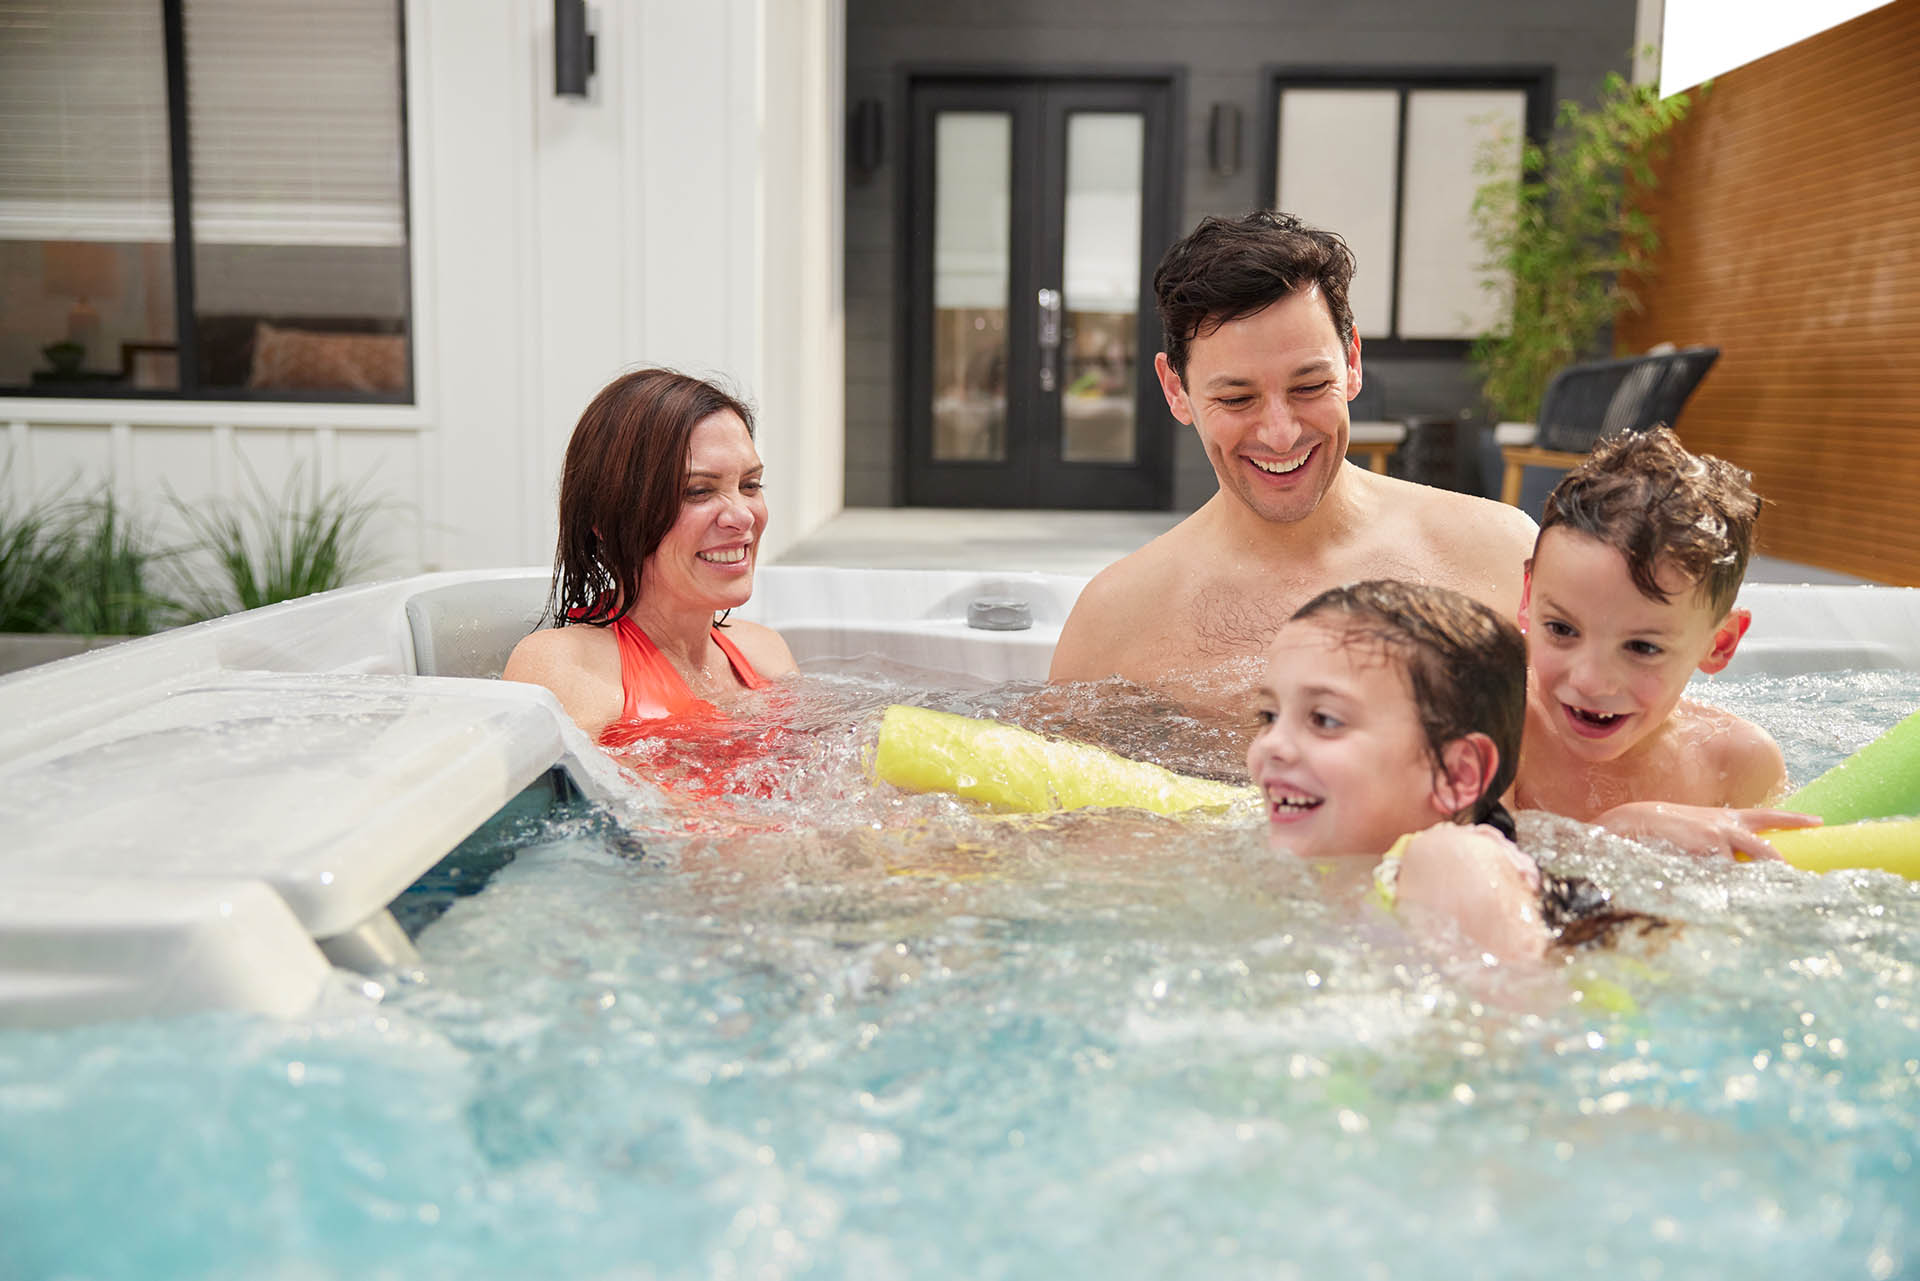 How to Expertly Manage Hard Water to Keep Your Hot Tub Like New